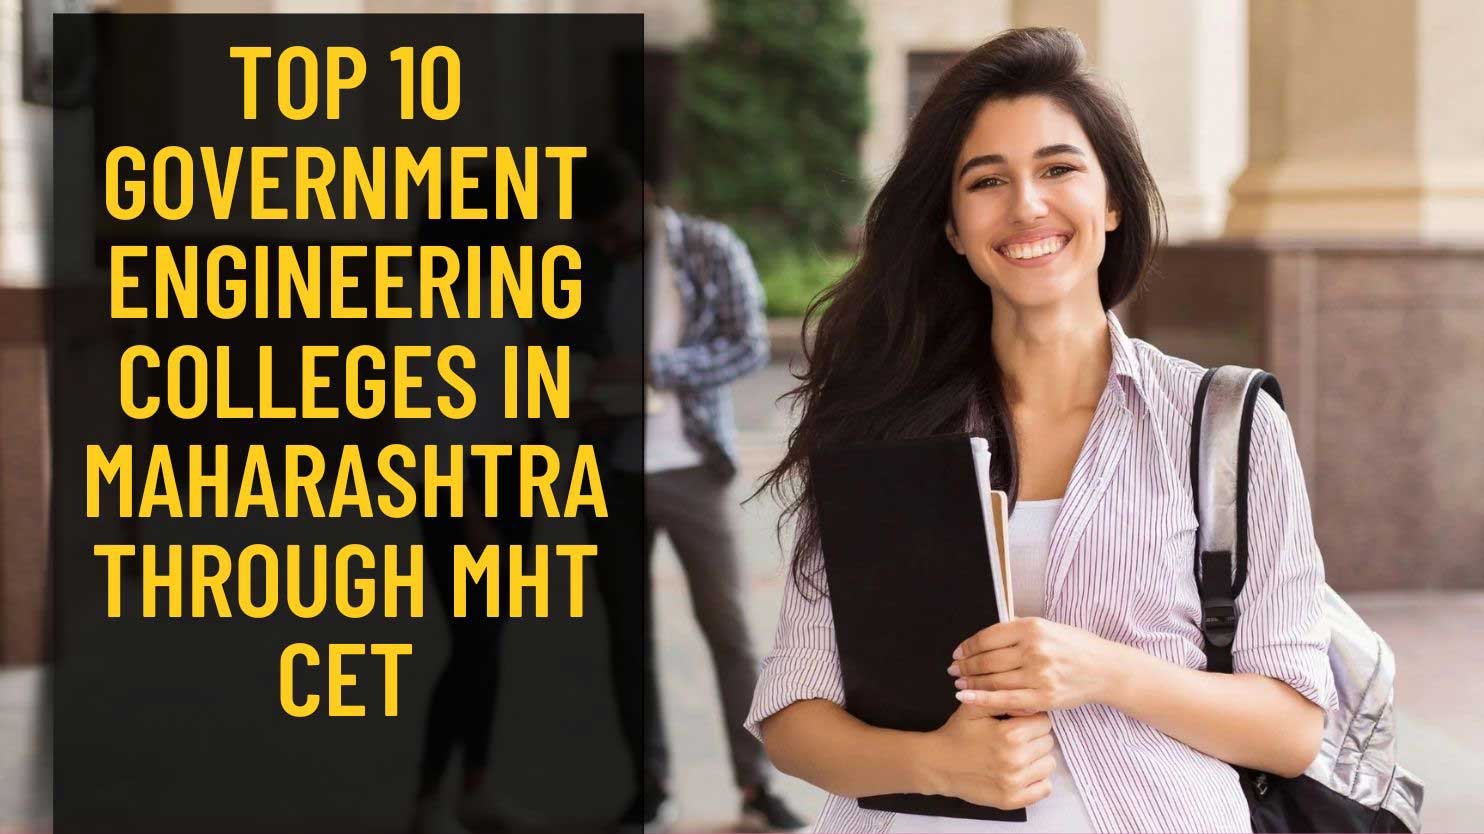 Top 10 Government Engineering Colleges in Maharashtra through MHT CET